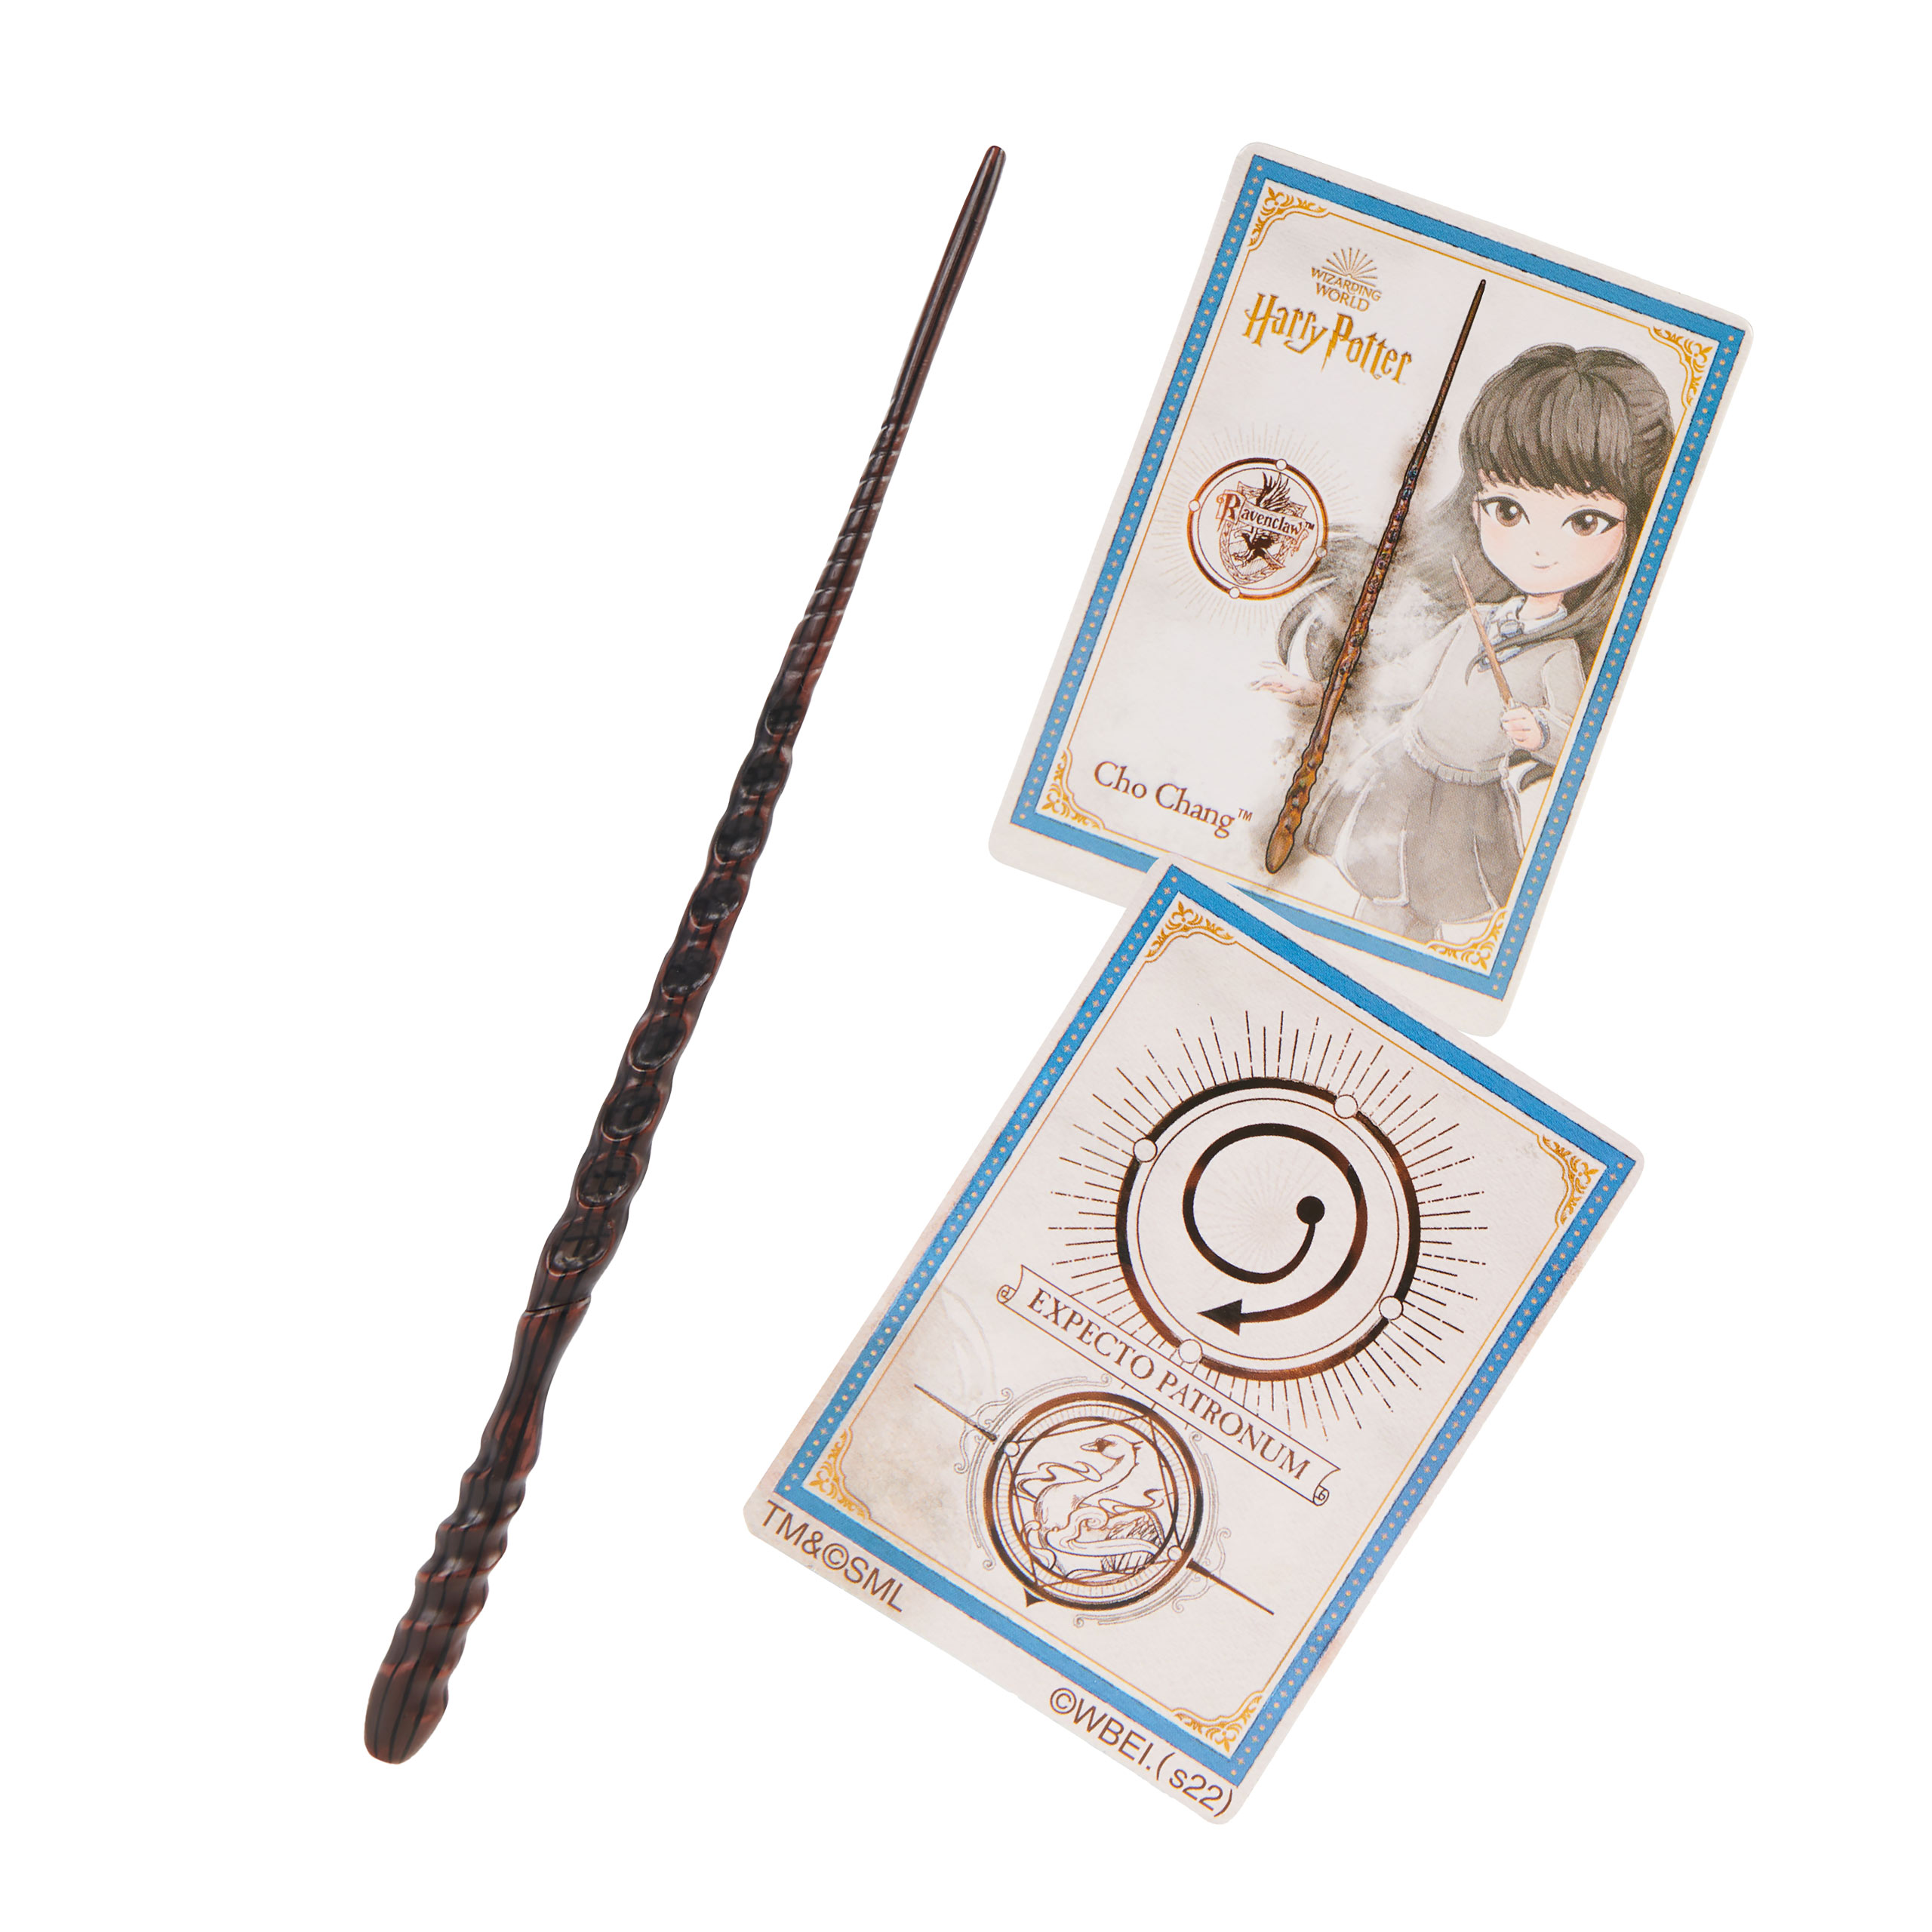 Harry Potter - Cho Chang Wand with Spell Card